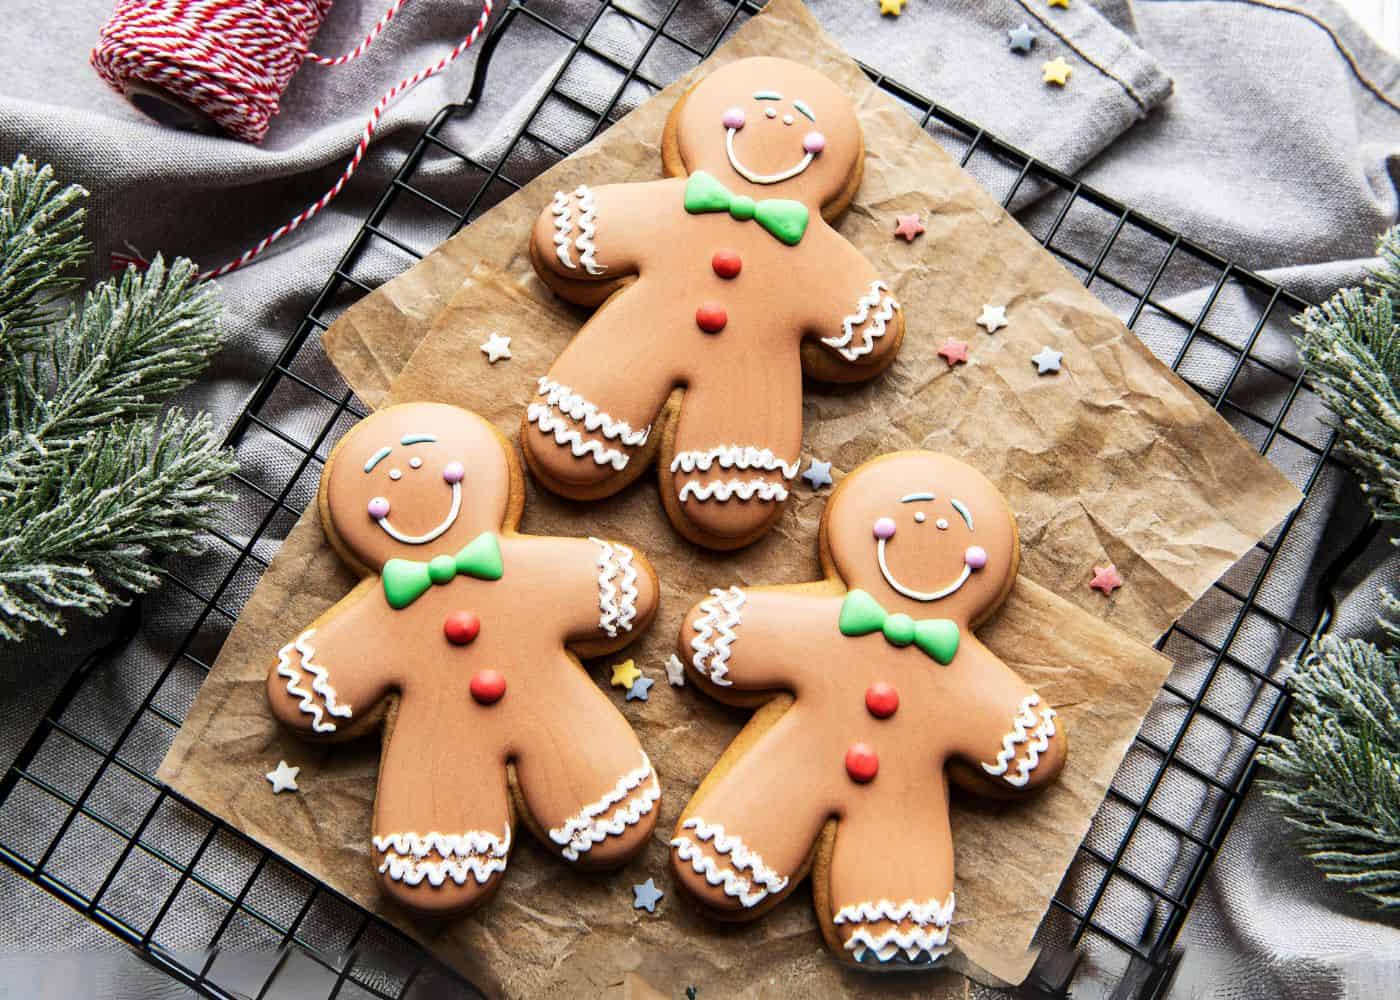 Freshly decorated gingerbread men on a baking rack